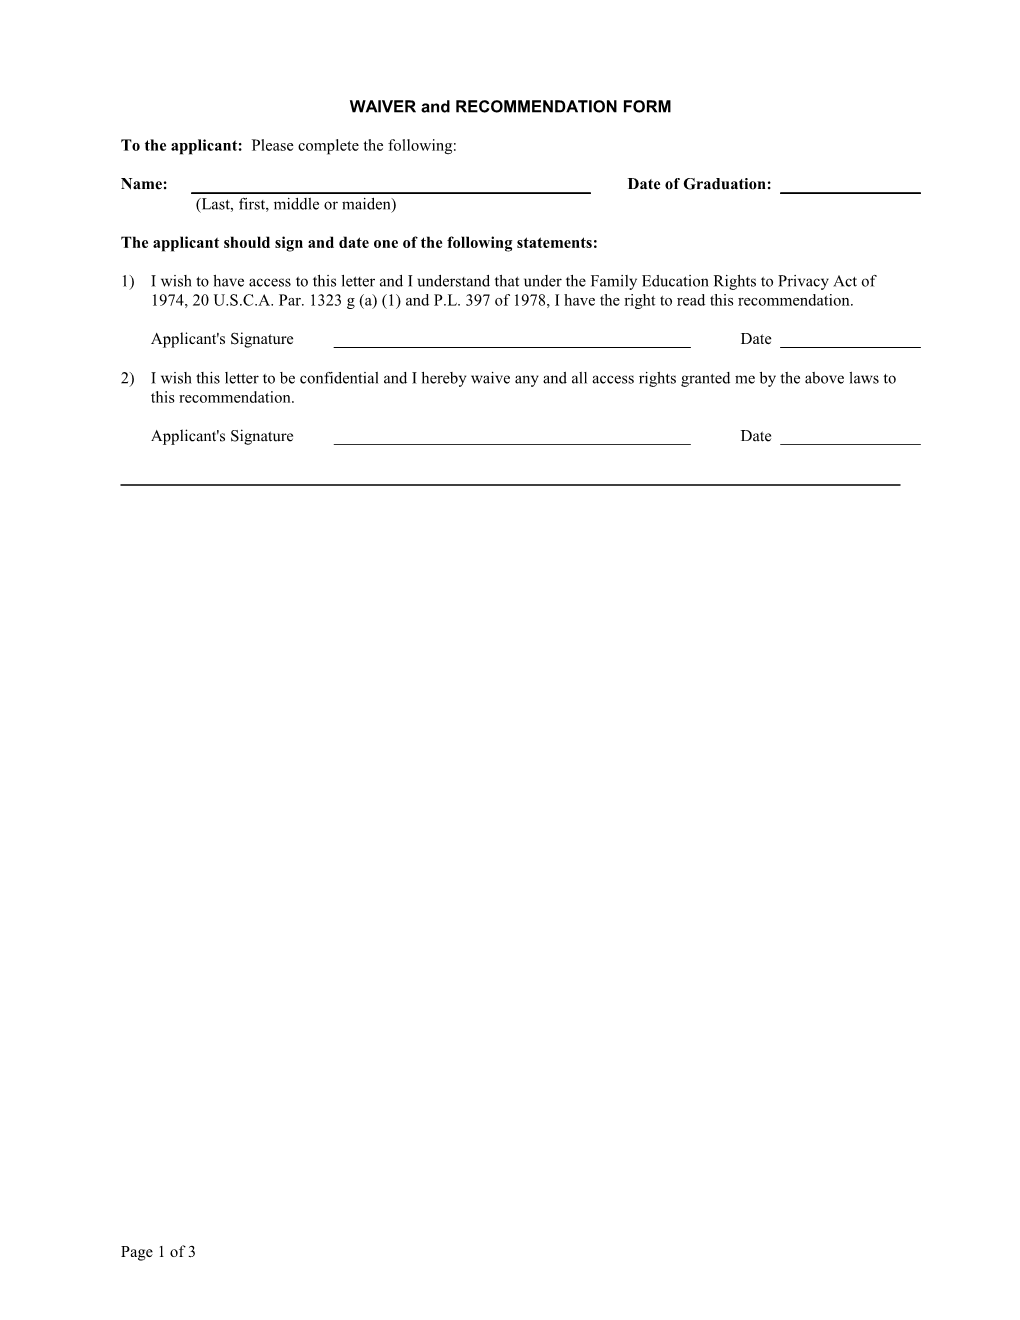 WAIVER and RECOMMENDATION FORM s1